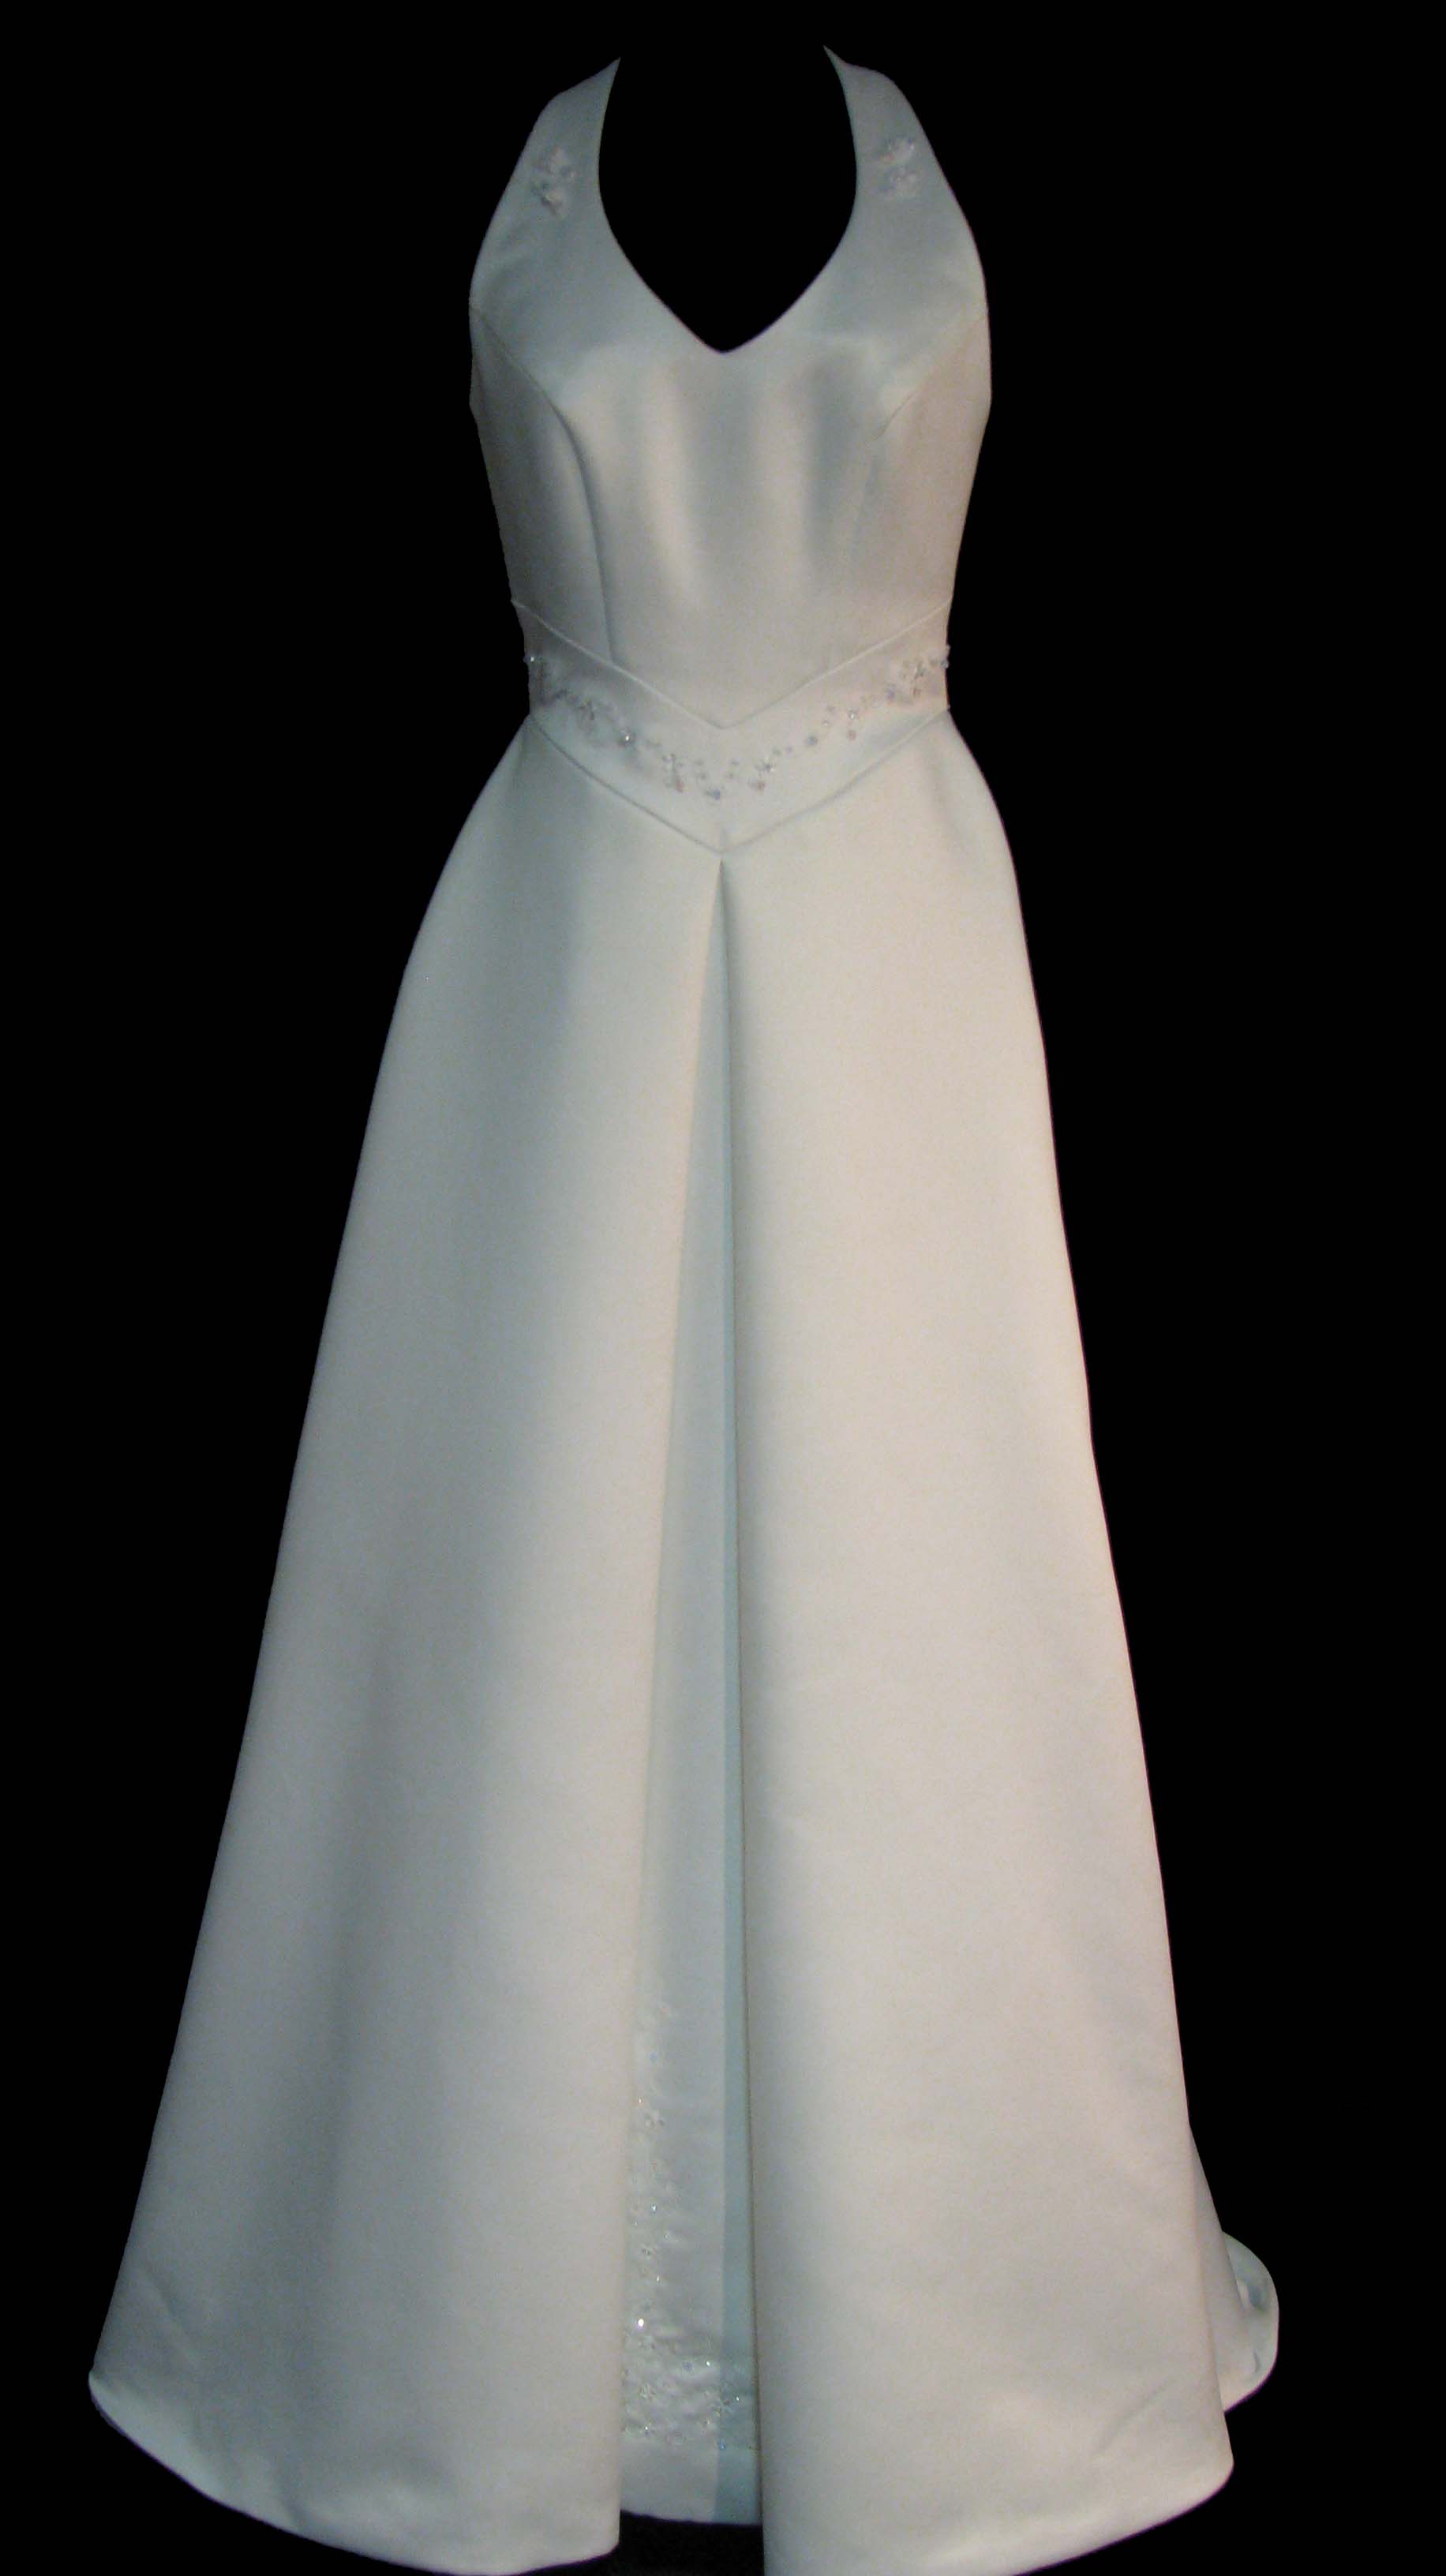 52-168frontf.jpg Madison Collection Gown 2052-168